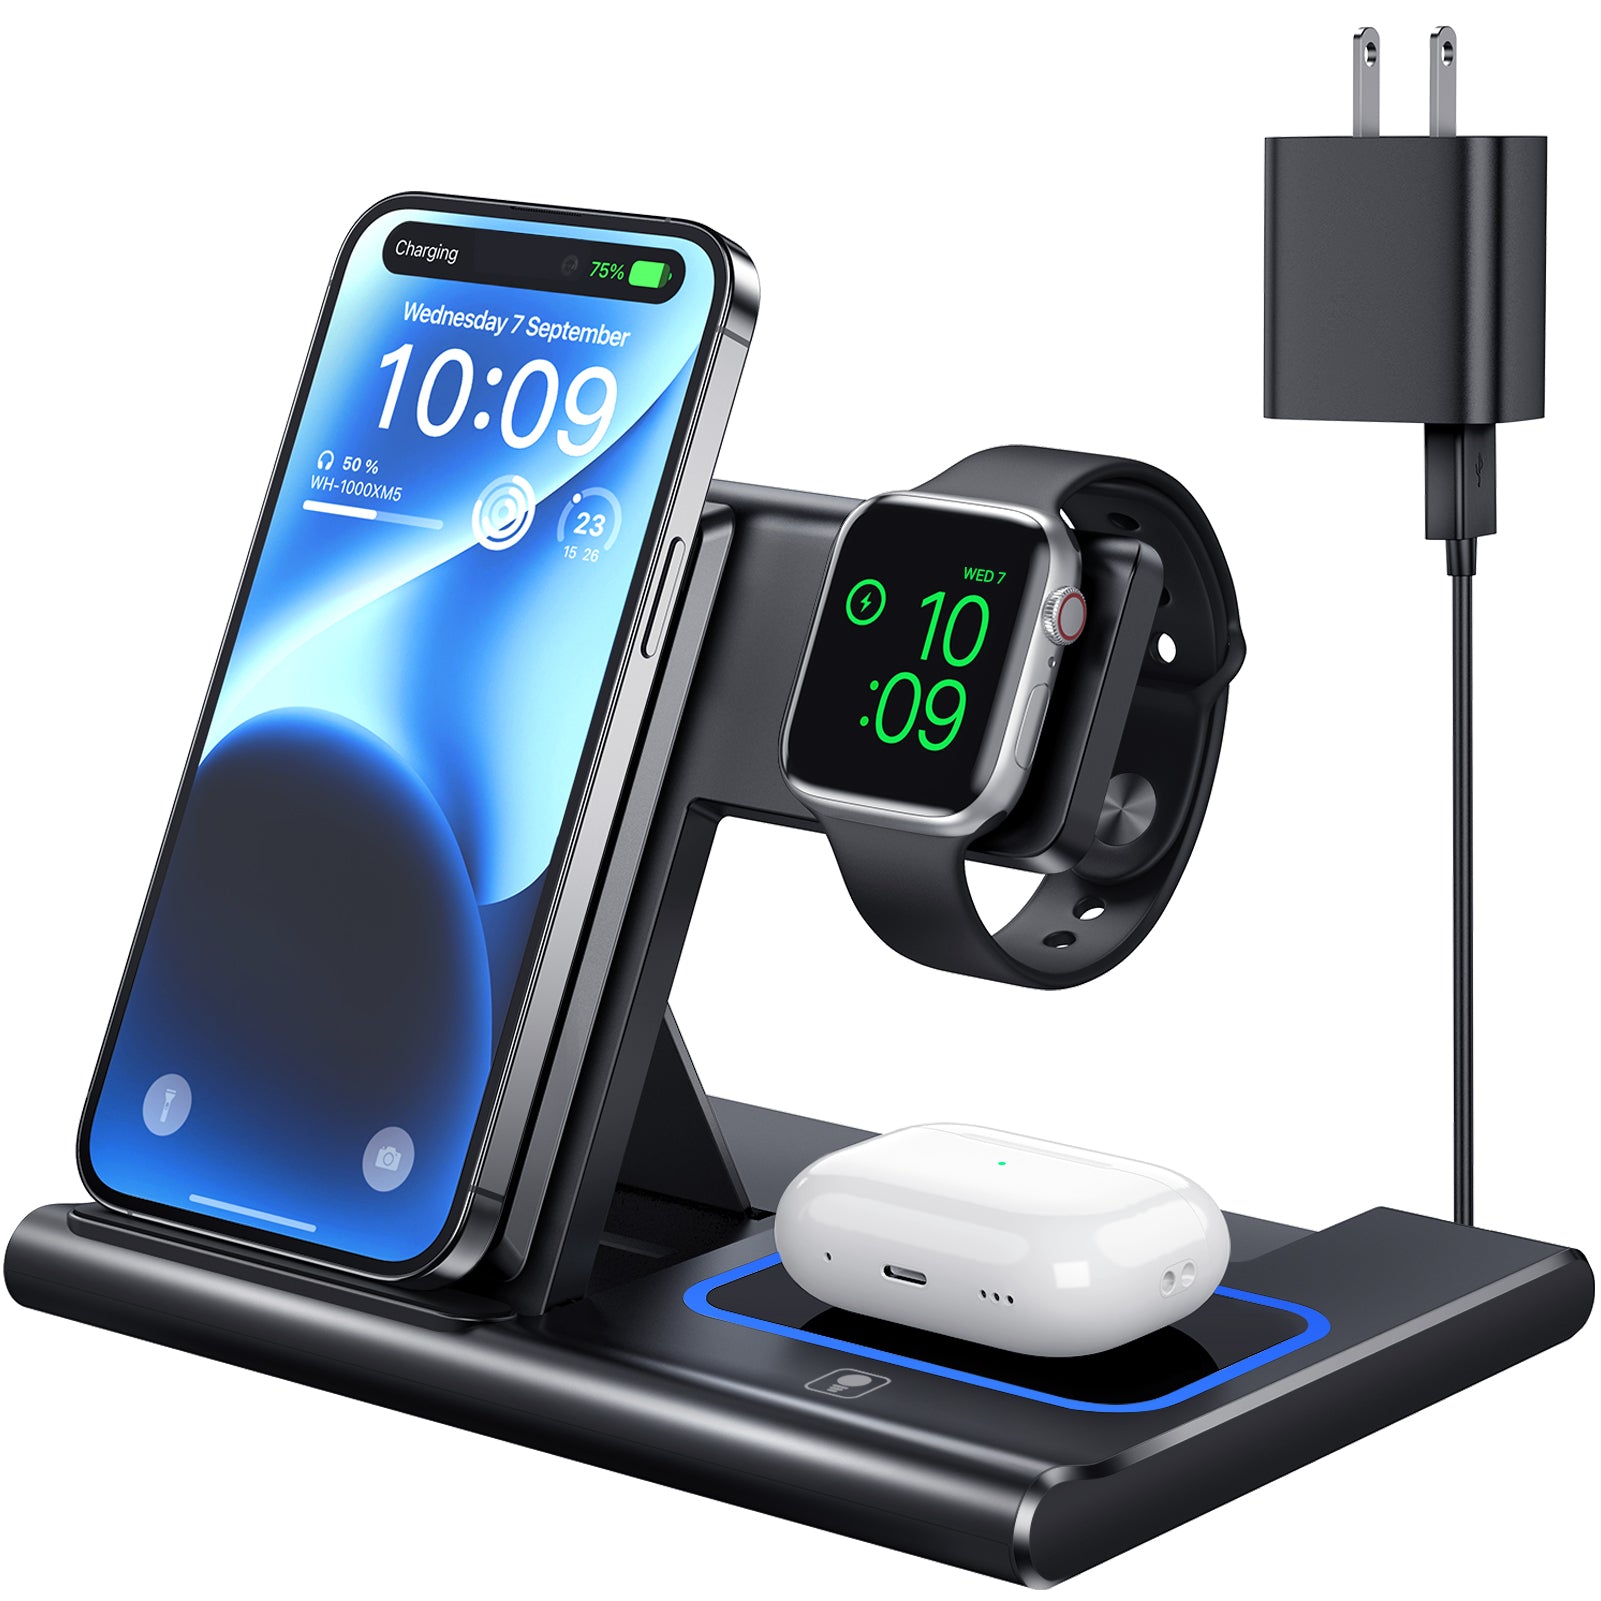 QKCHAG 3 in 1 Wireless Charger Stand